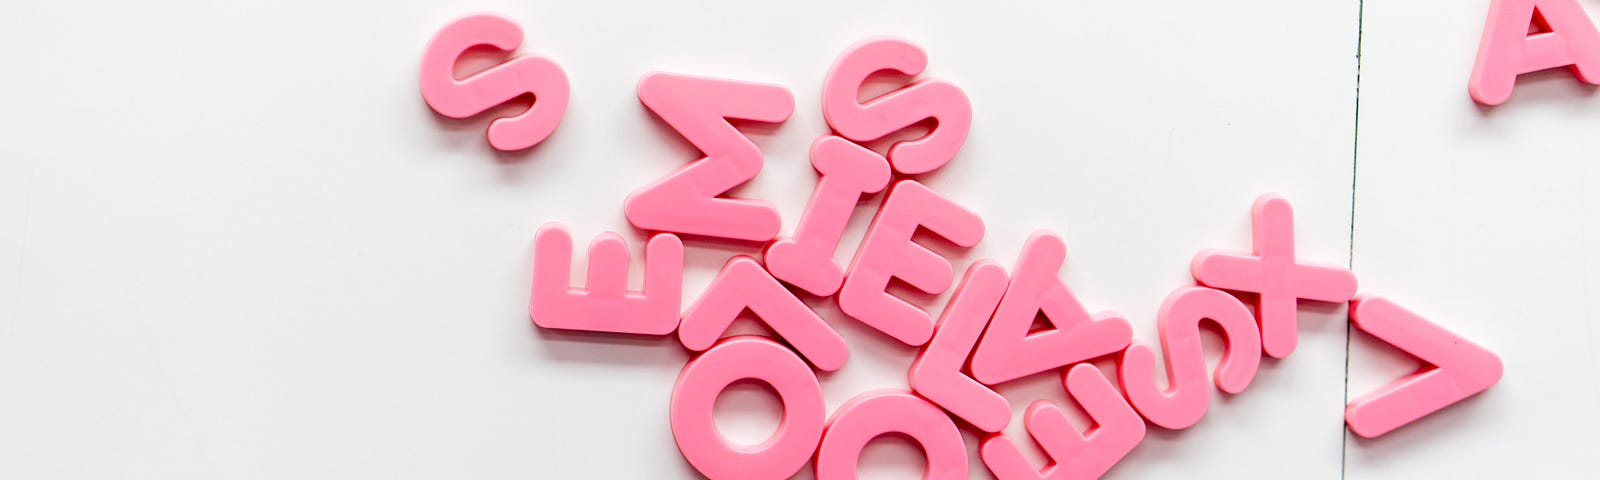 Pink-red fridge magnet letters all in a jumble on a white magnetic board